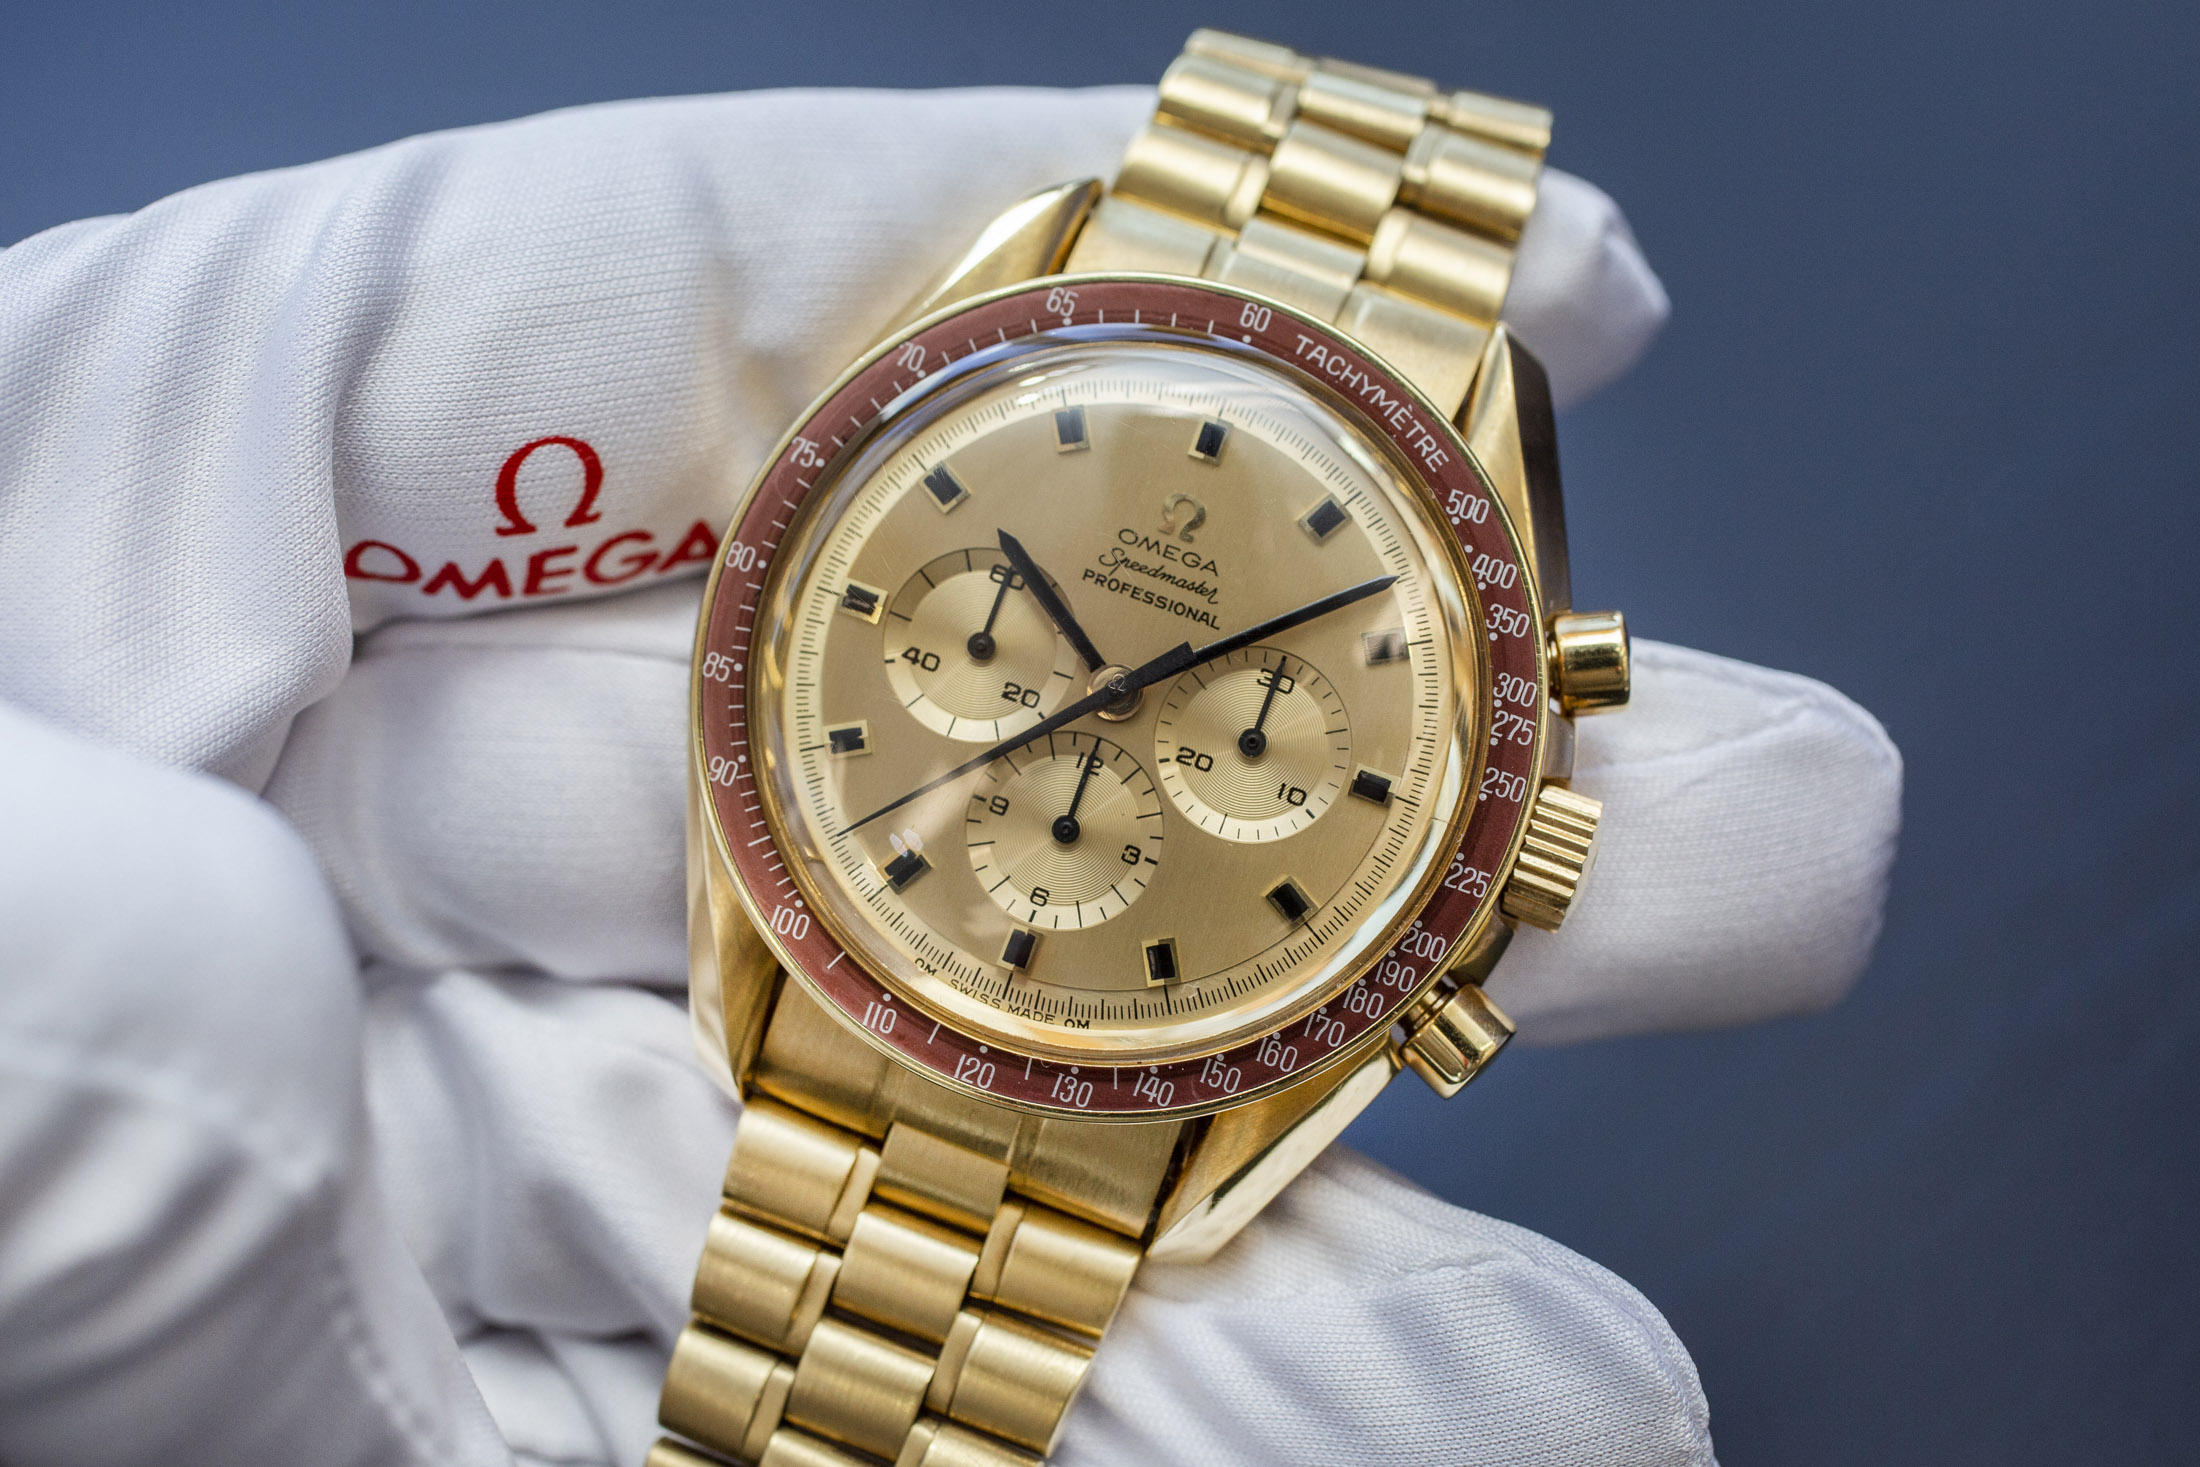 omega gold watch